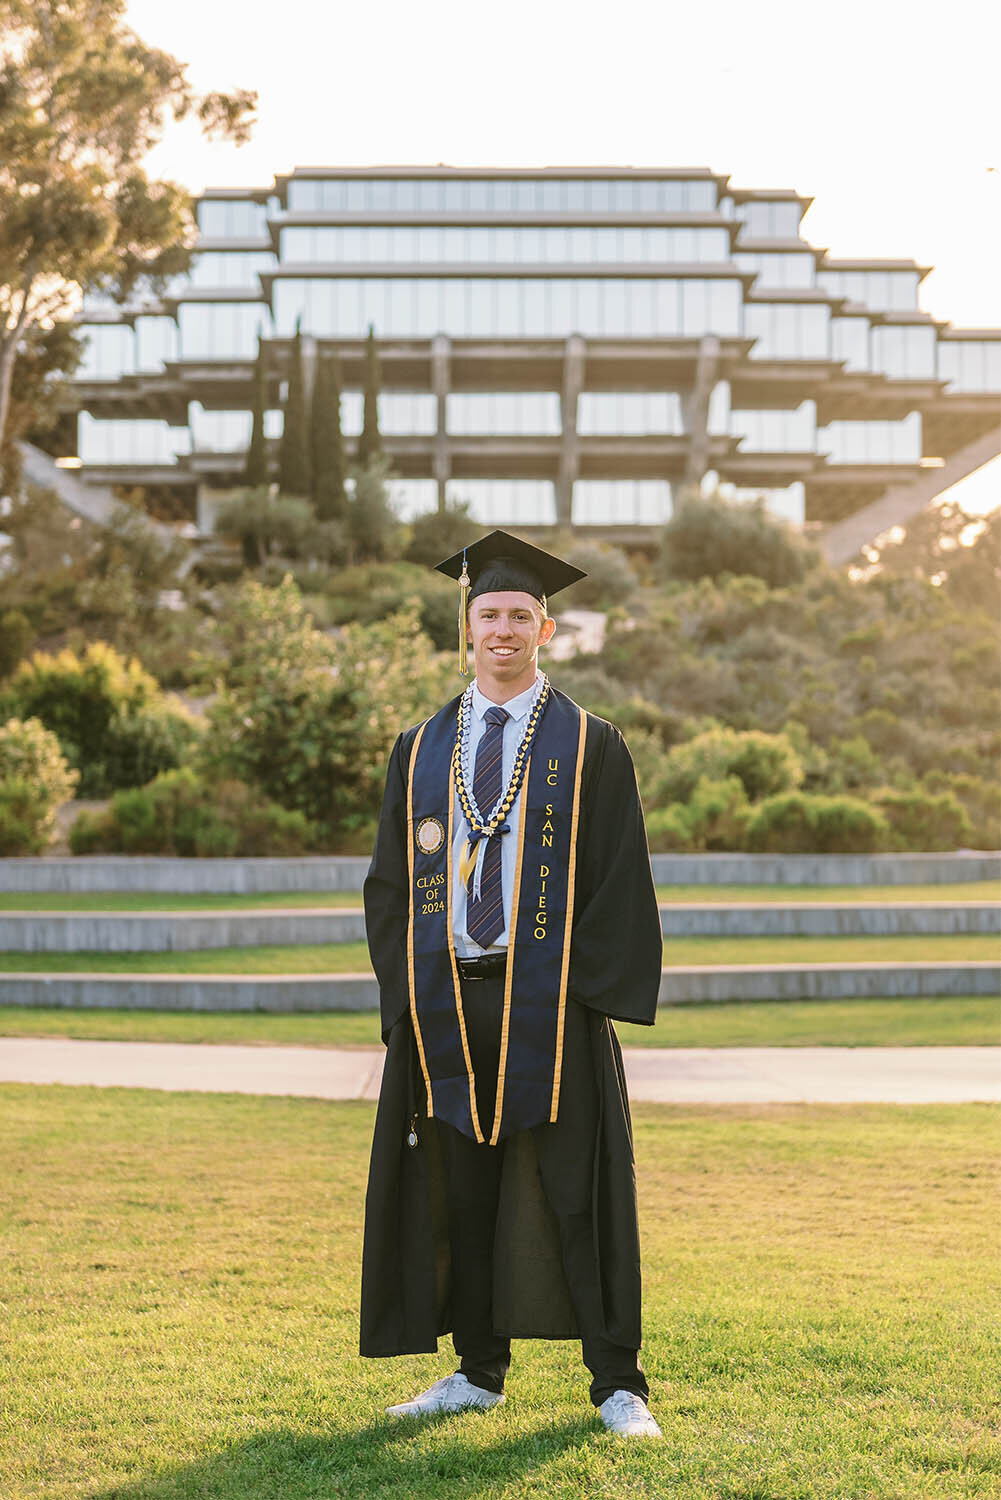 UCSD graduation photoshoot at Geisel Library